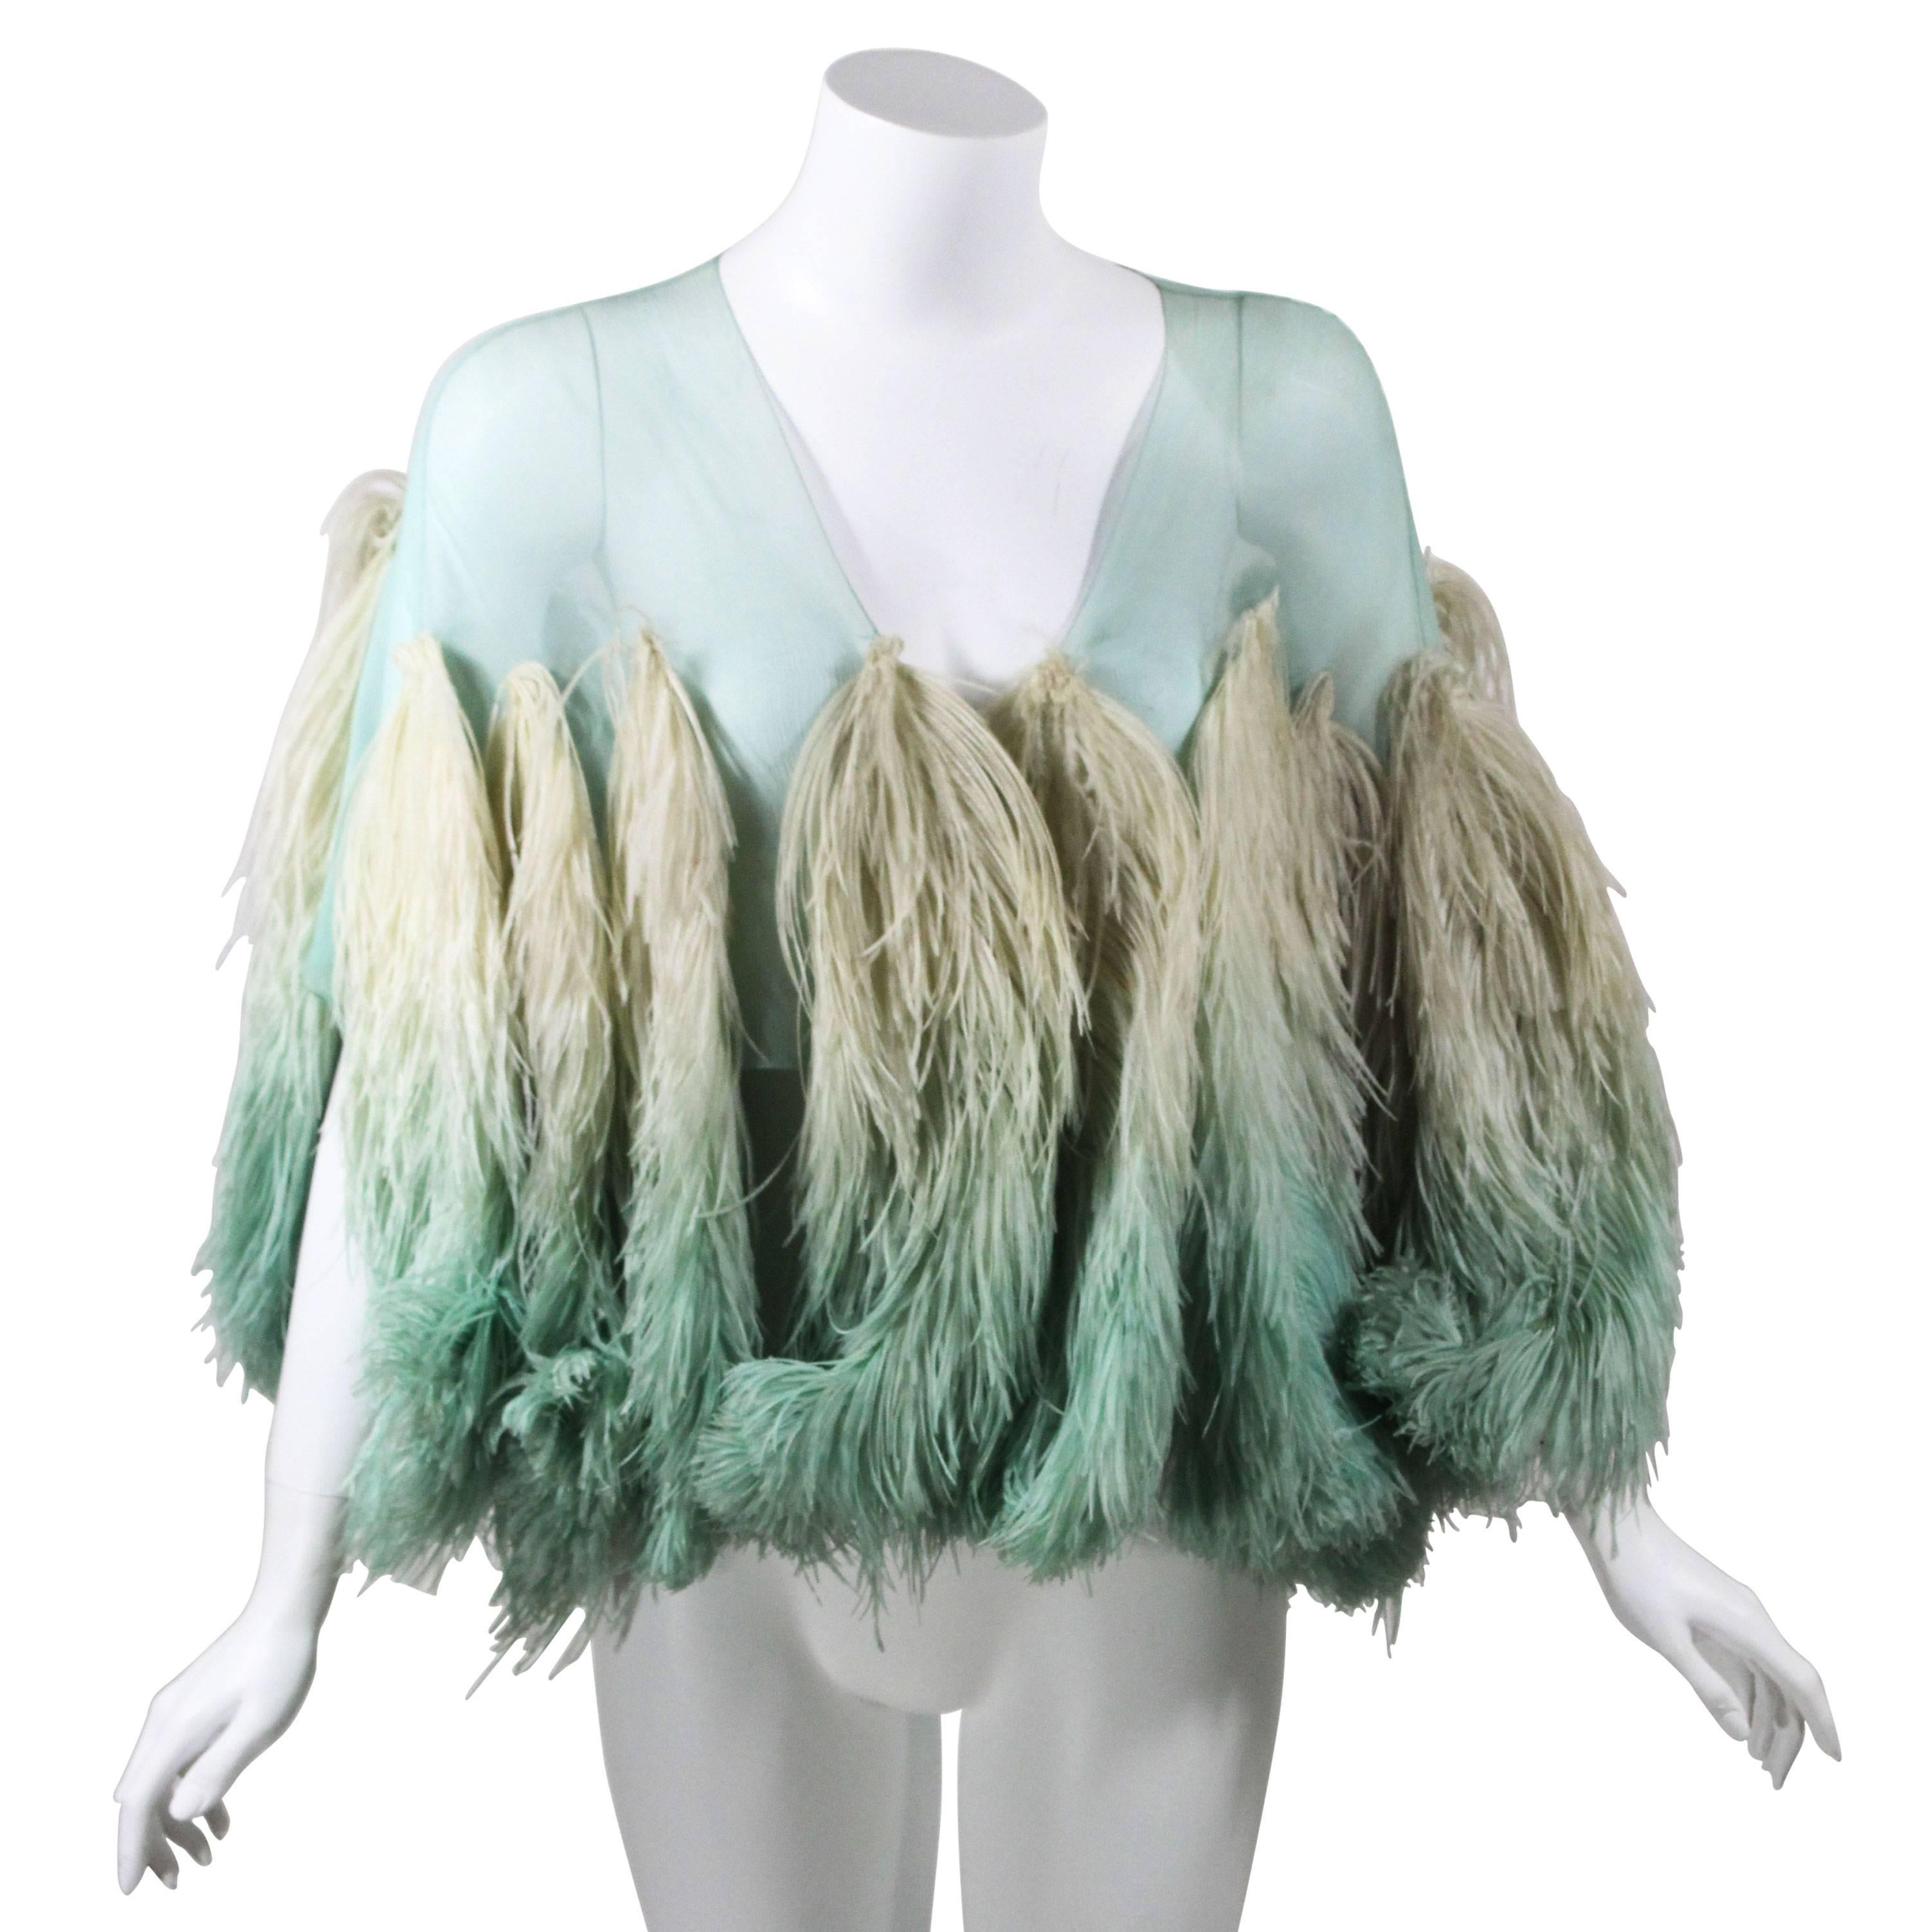 A breathtaking cape done in  a fine  silk georgette in the  stunning color of  aquamarine blue/green, possibly hand dyed. Sixteen ombre ostrich feathers from beige to aquamarine are hand sewn on the silk base to create this sensational wrap. The